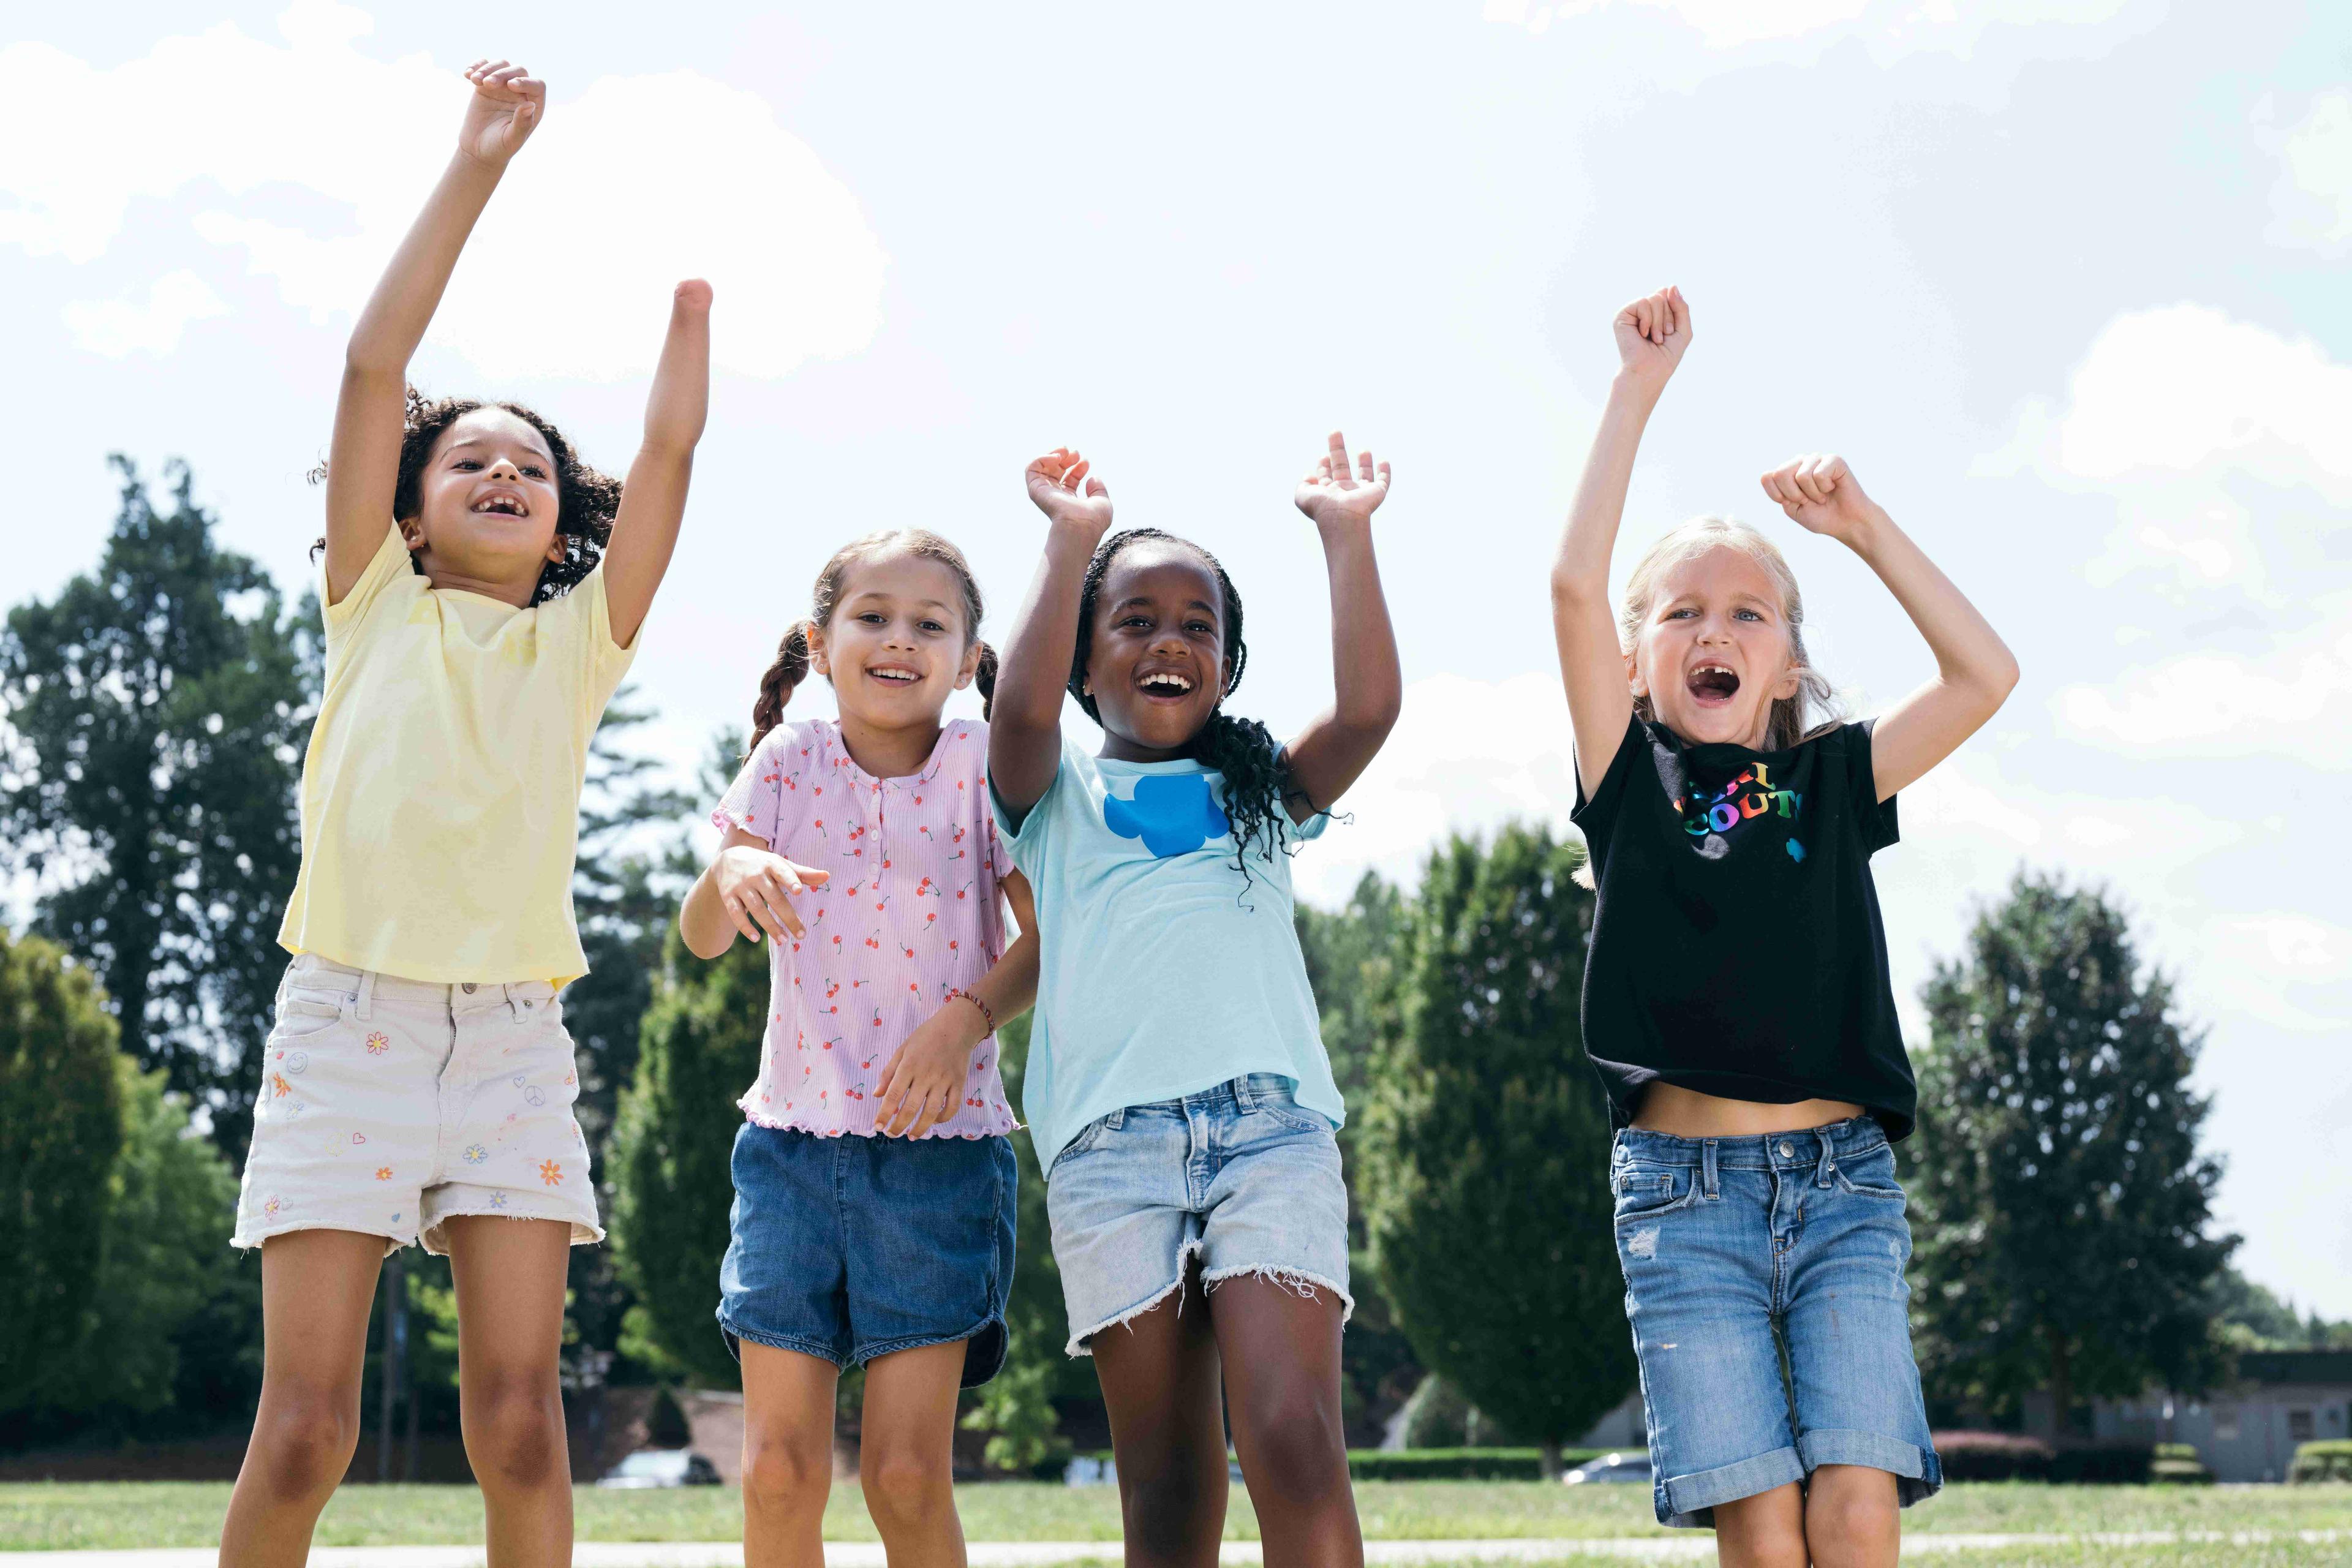 A group of Girl Scouts spending time outdoors and jumping in the air with their arms raised above their heads.